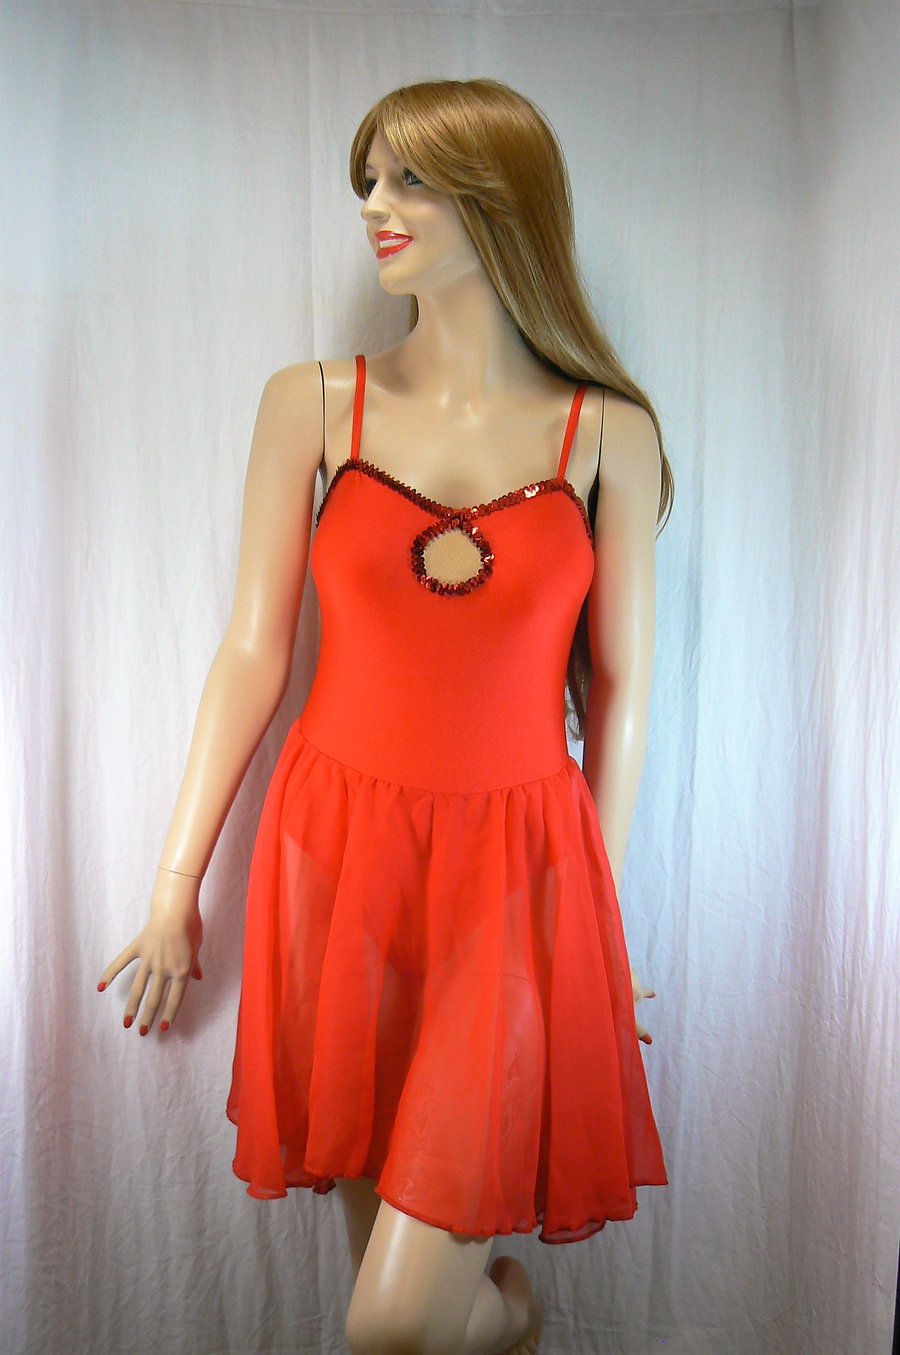 Red camisole dress with chiffon skirt and sequin trim